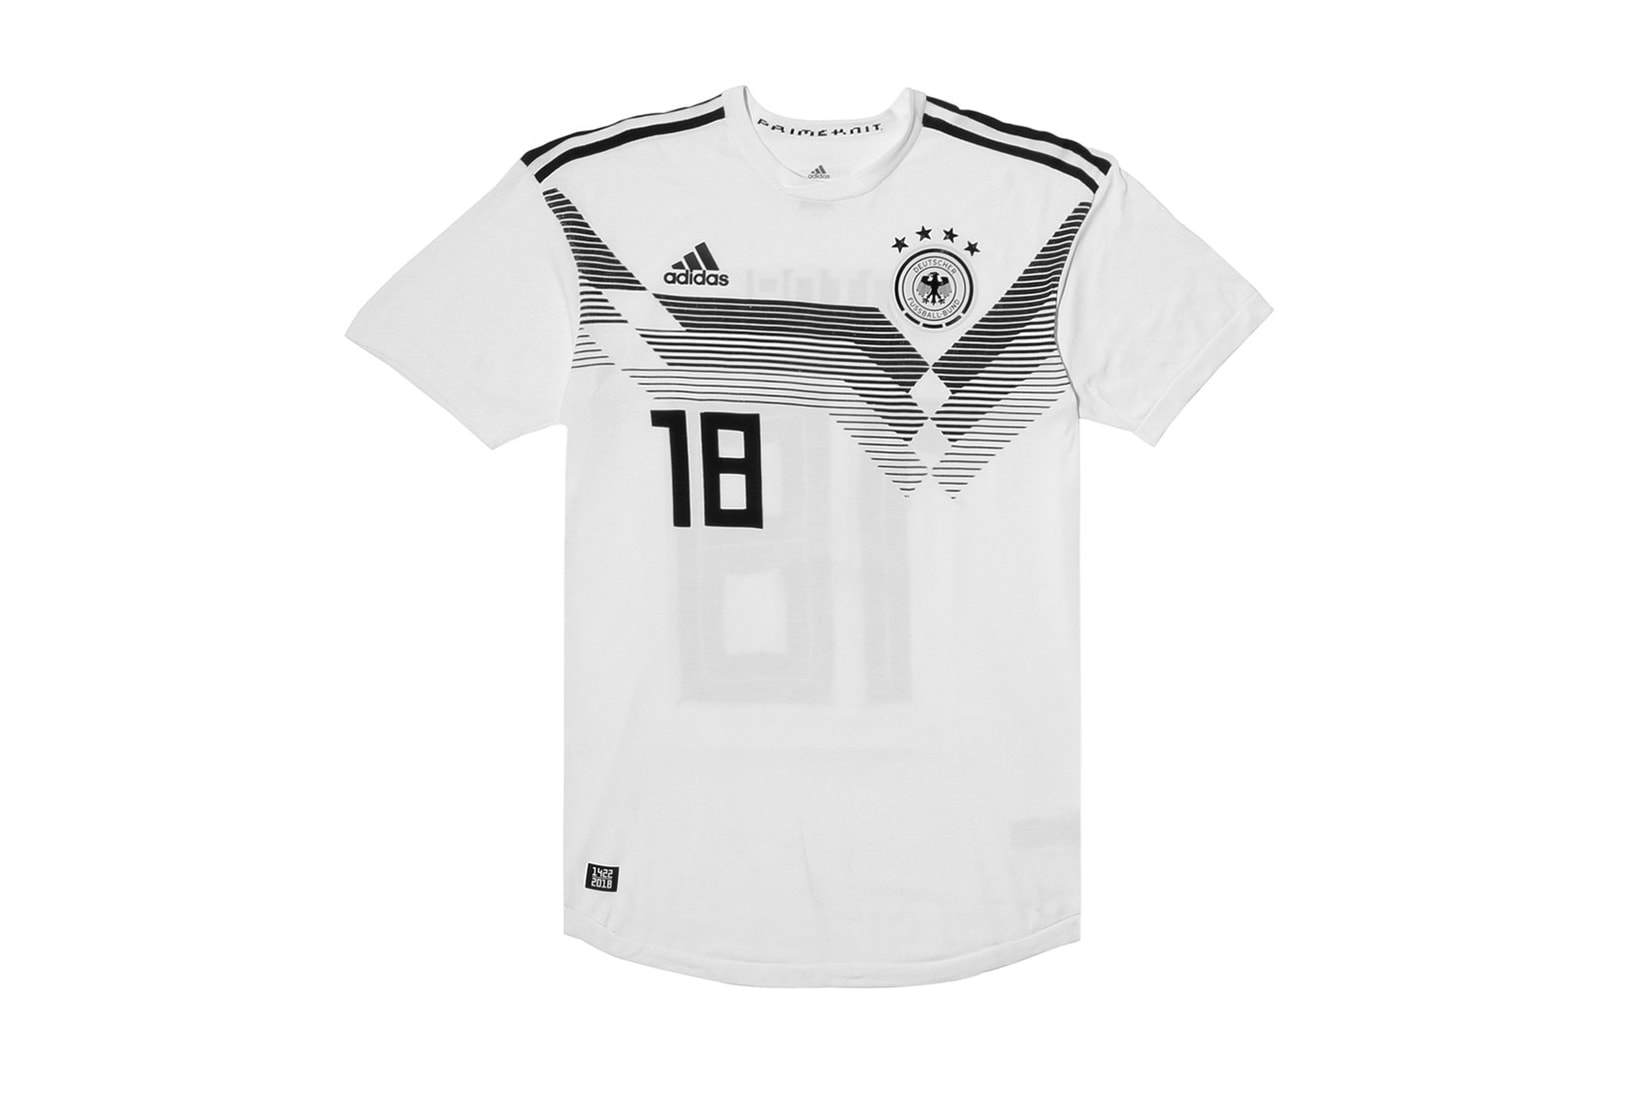 adidas Limited Edition Primeknit Germany Soccer Jersey white black 2018 world cup june release date info drop football fifa